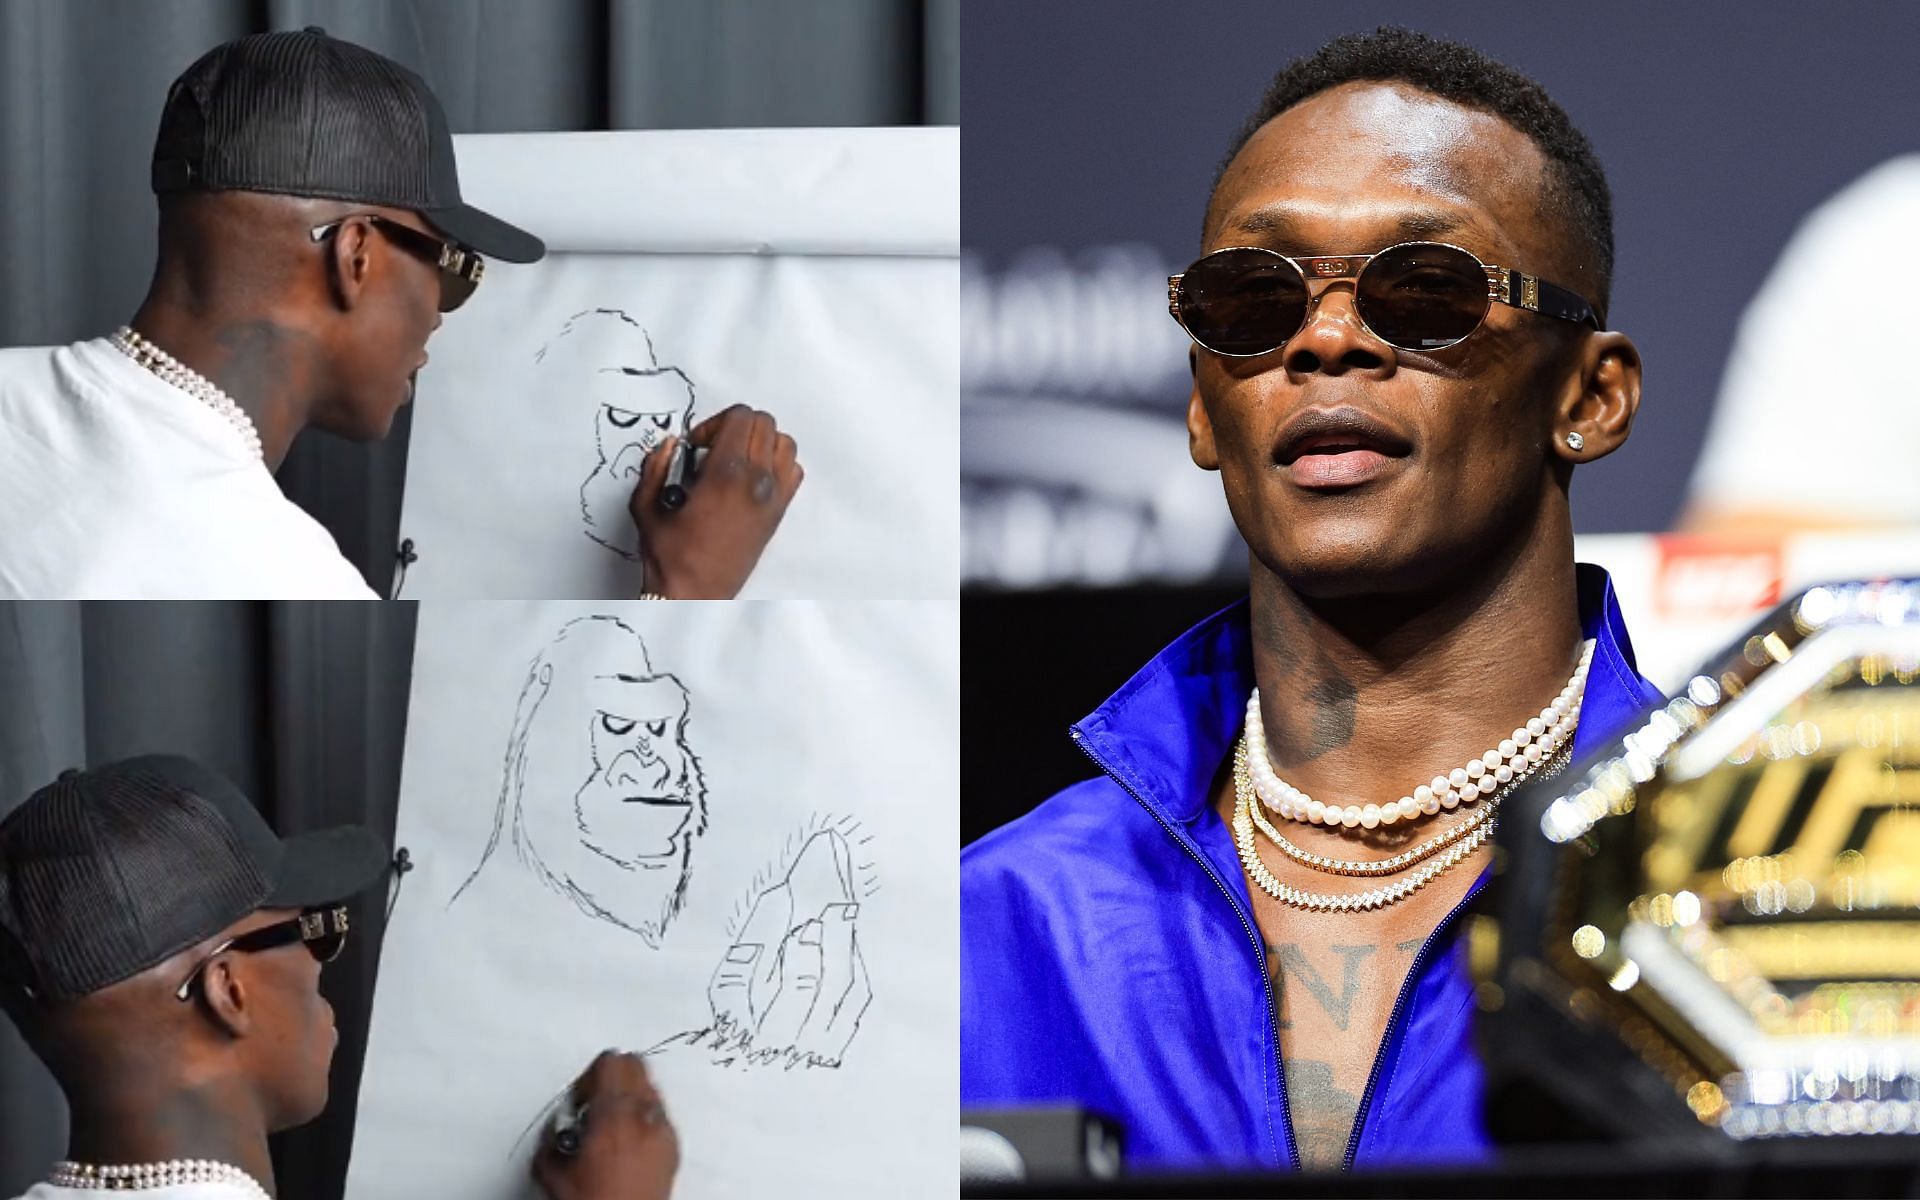 Adesanya showcasing his art [images courtesy of @ufc Twitter and Getty, respectively]